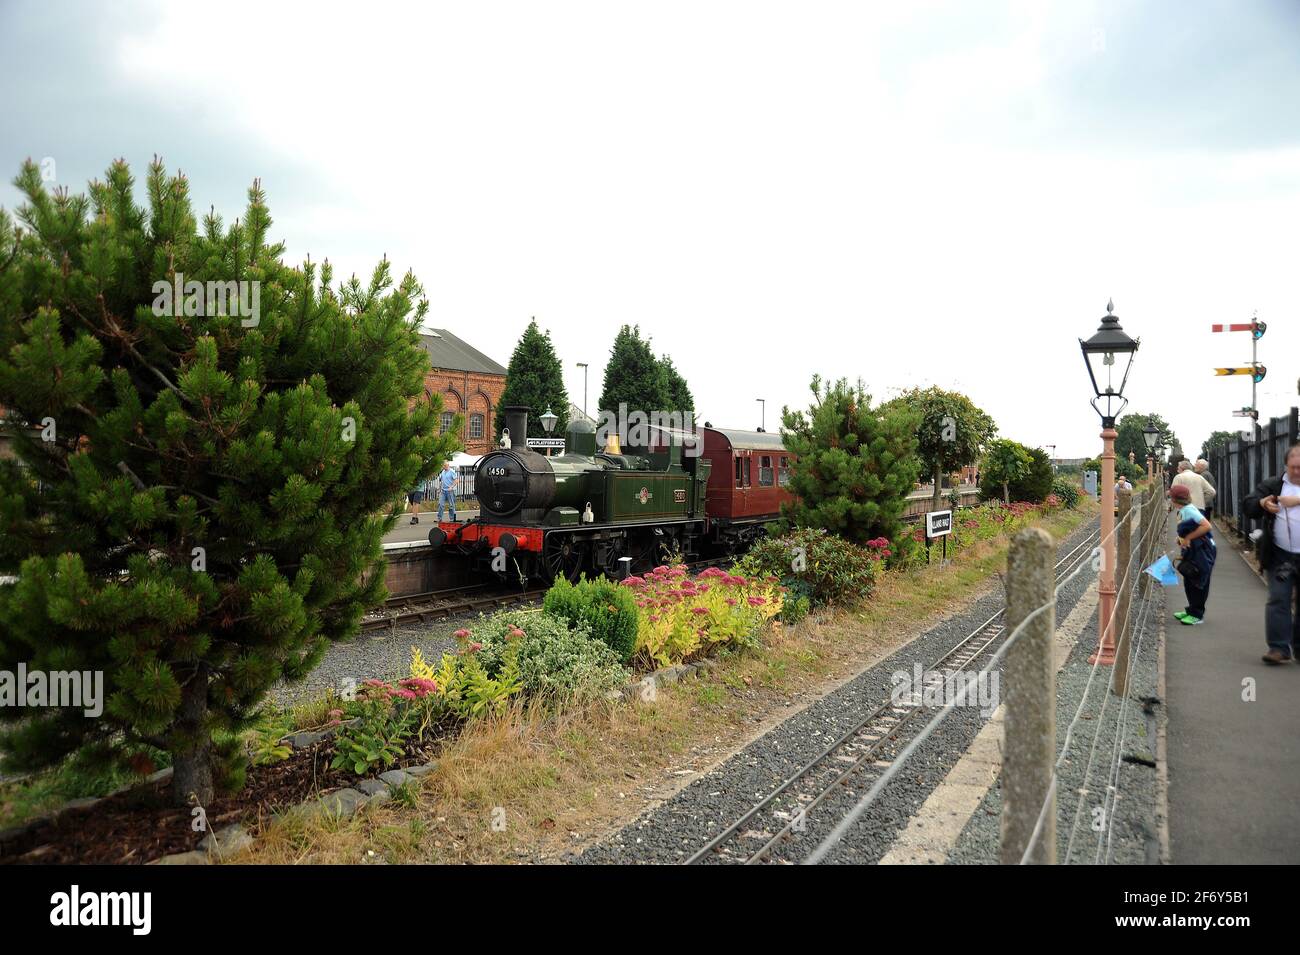 '1450' at Kidderminster Town. Stock Photo